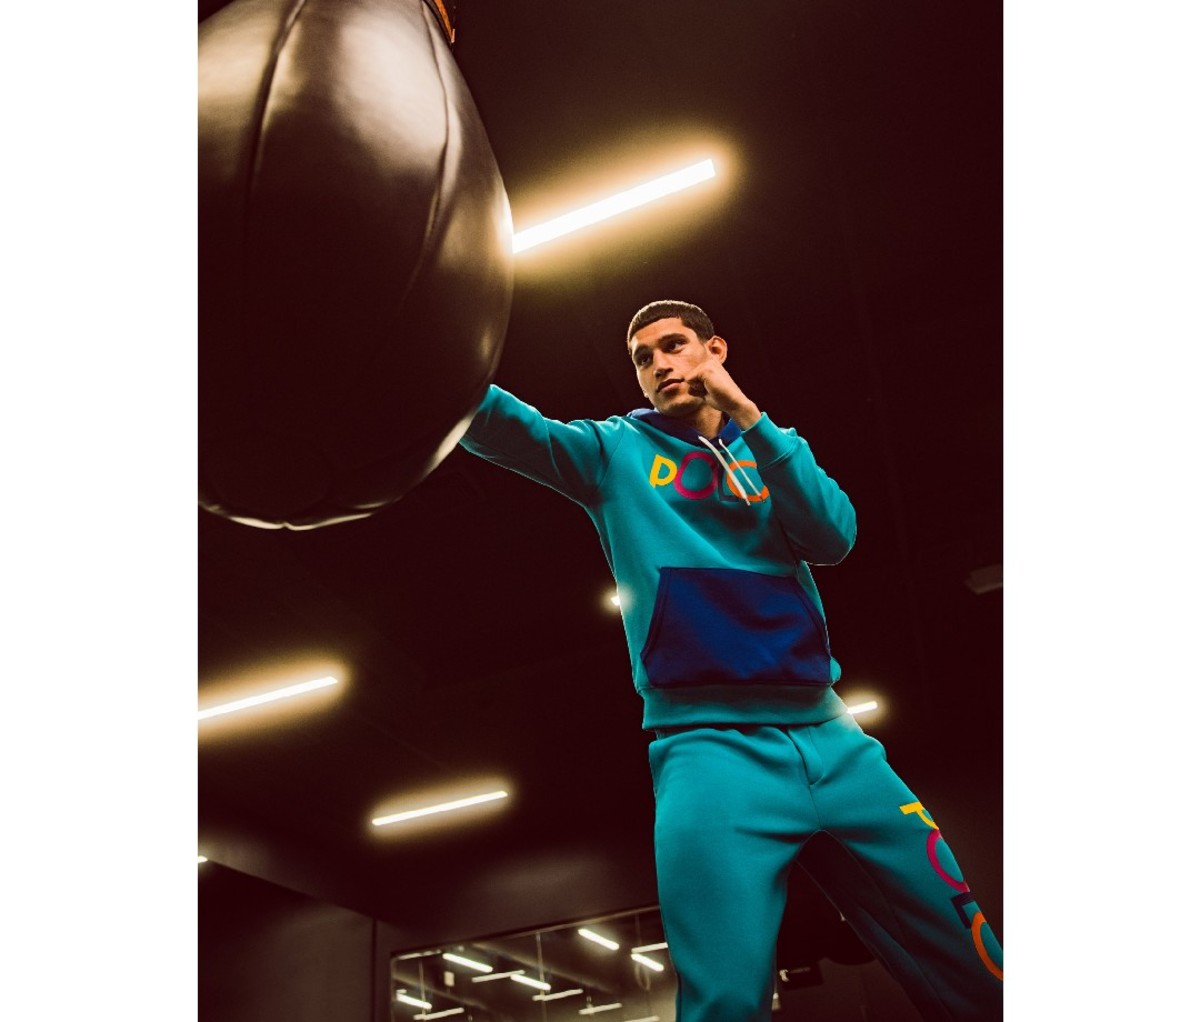 Model and 3x national boxing champ Alexis Chaparro wears new Polo Men’s x Macy’s Spectre 2 collection